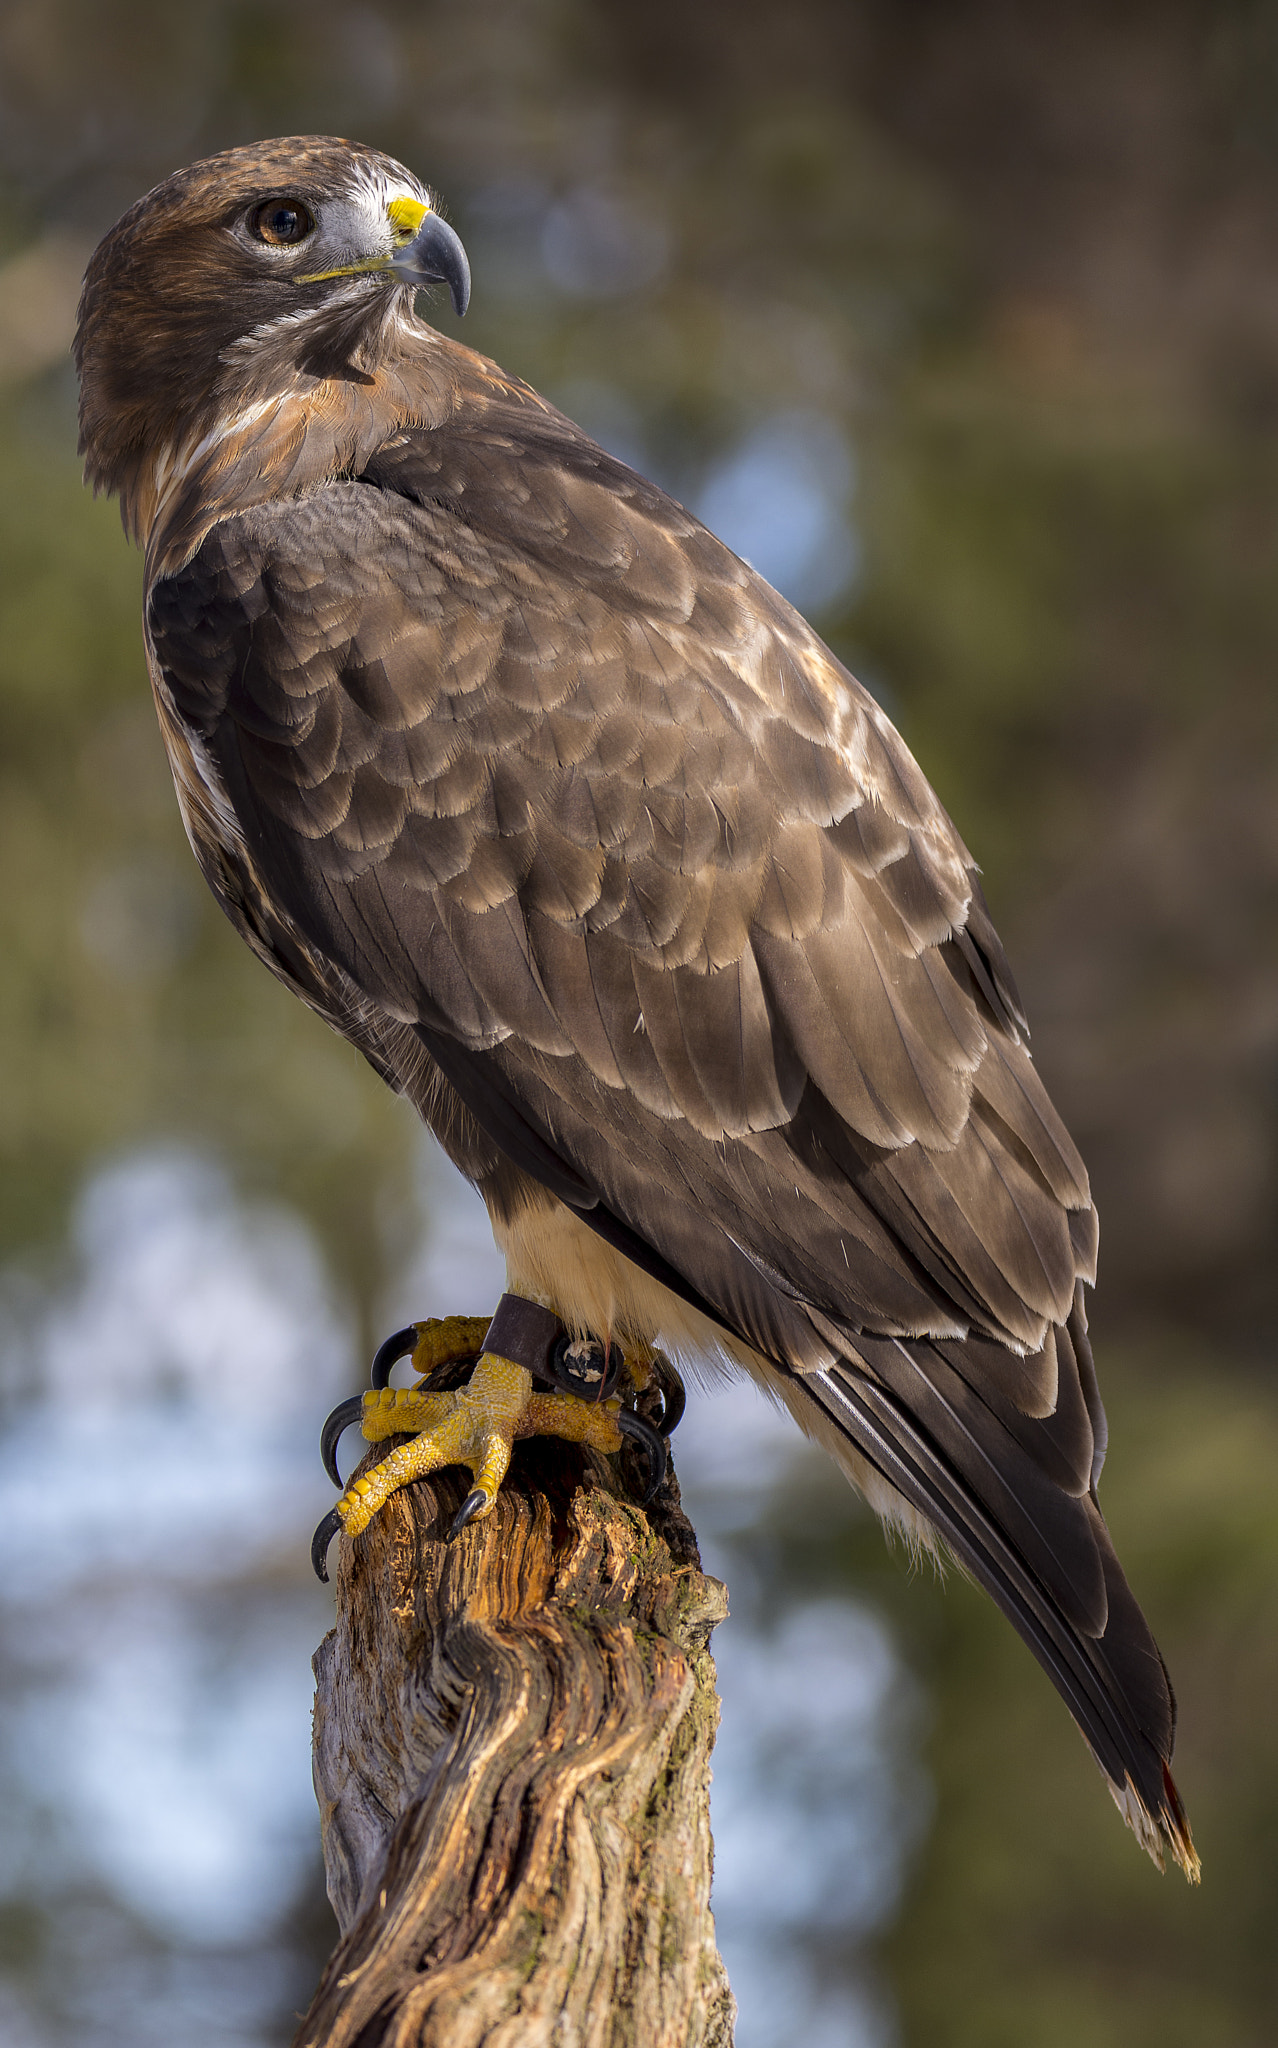 Nikon D5200 + Sigma 150-600mm F5-6.3 DG OS HSM | C sample photo. Red tailed hawk photography